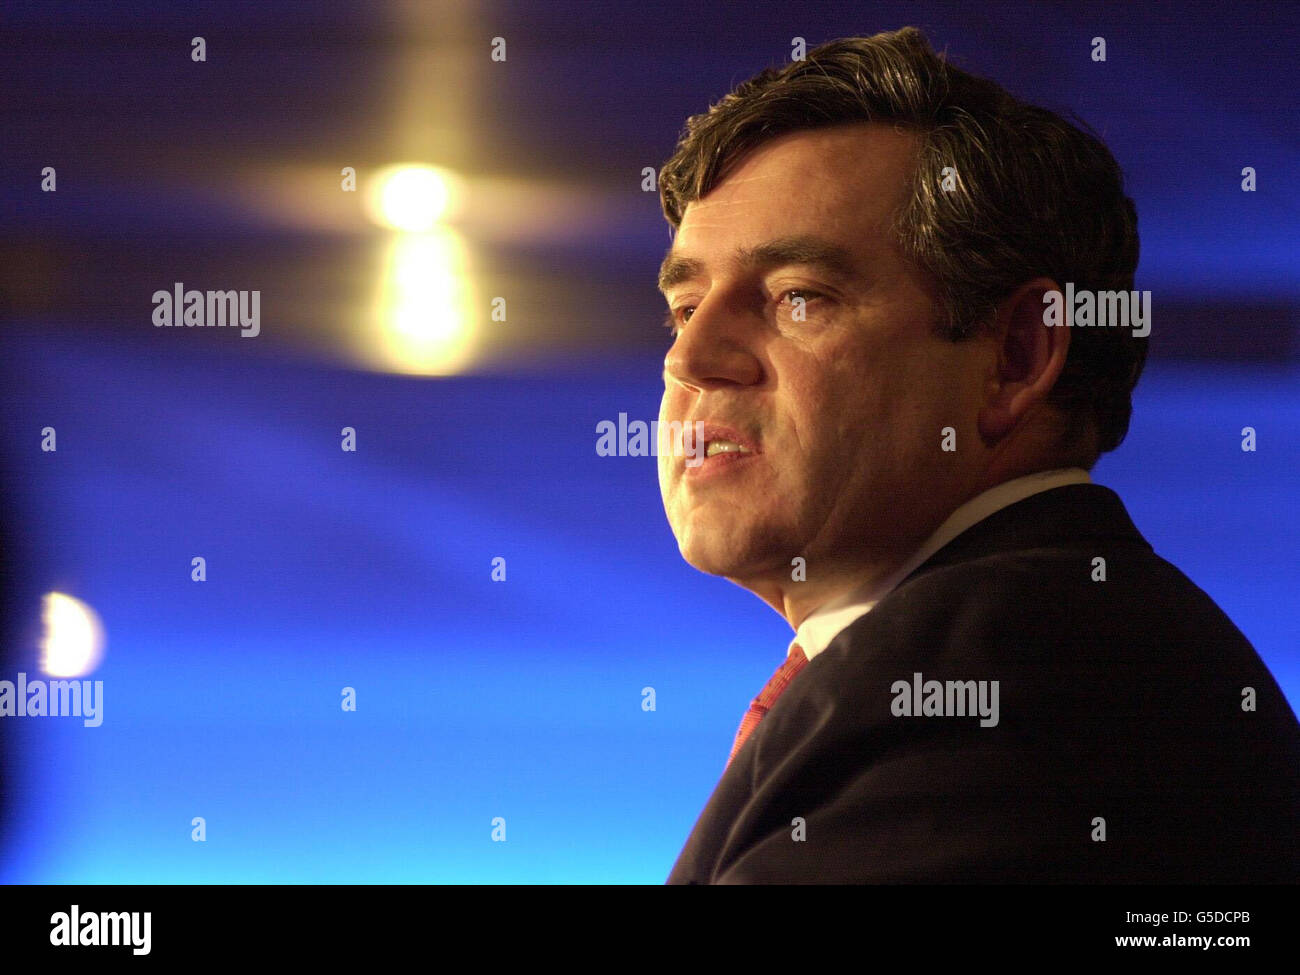 Chancellor Gordon Brown speaks at the launch of Labour's business manifesto in London. He held out the prospect of a 'virtuous circle of economic stability, rising investment and improved competitiveness' for British business under a second Labour administration. He said his first government had kept its promise to build a partnership with firms by keeping interest rates and inflation down while investing in skills. Stock Photo